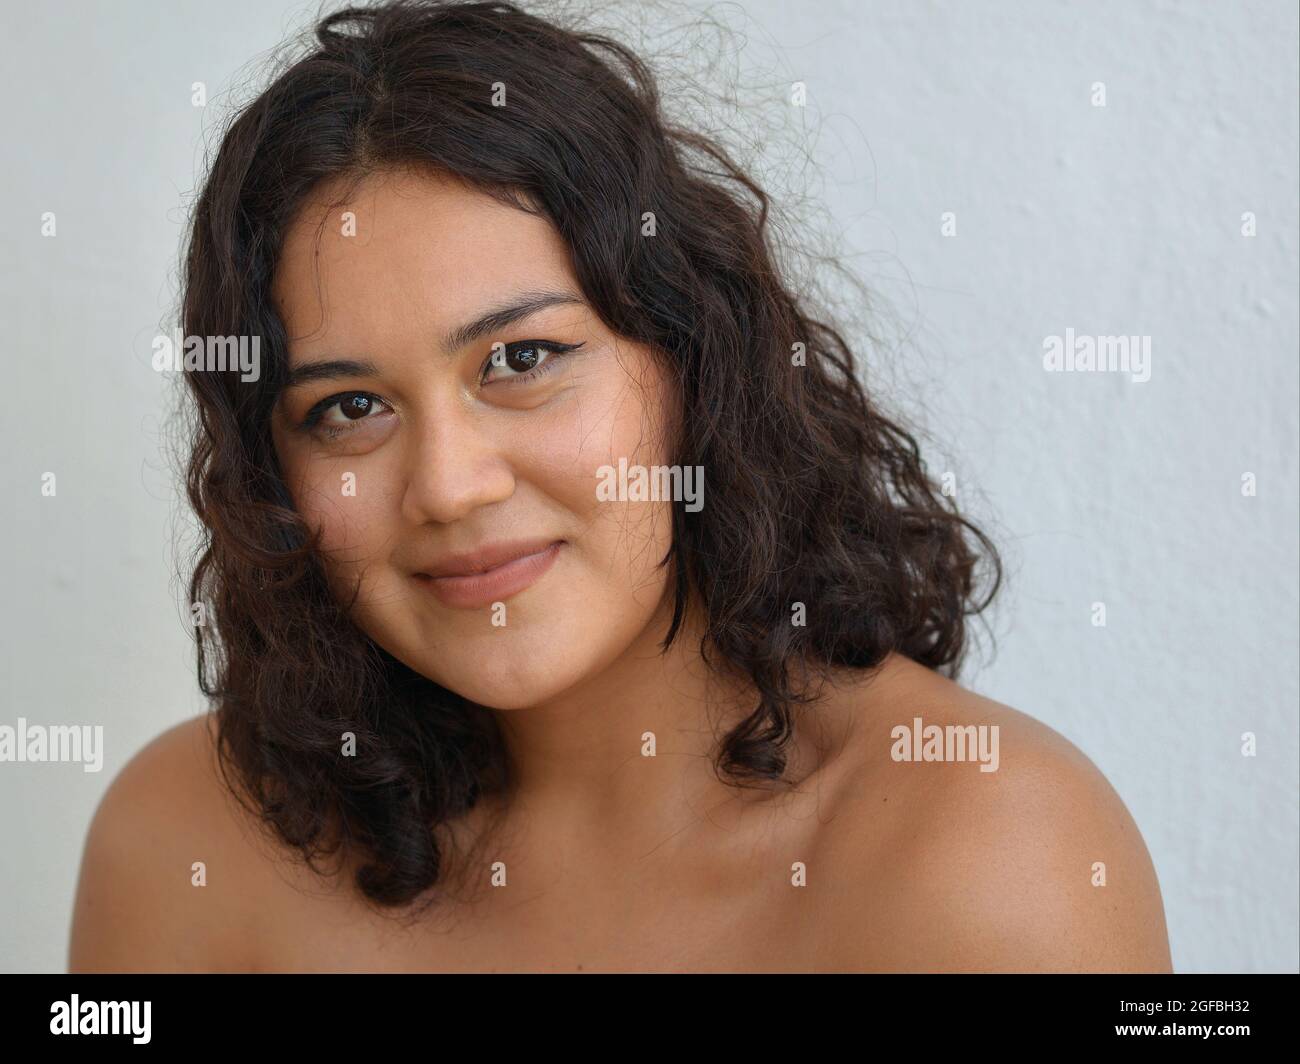 Young beautiful Mexican Latina woman with curly long hair, smiling brown eyes and bare shoulders poses for the camera in front of a white background. Stock Photo